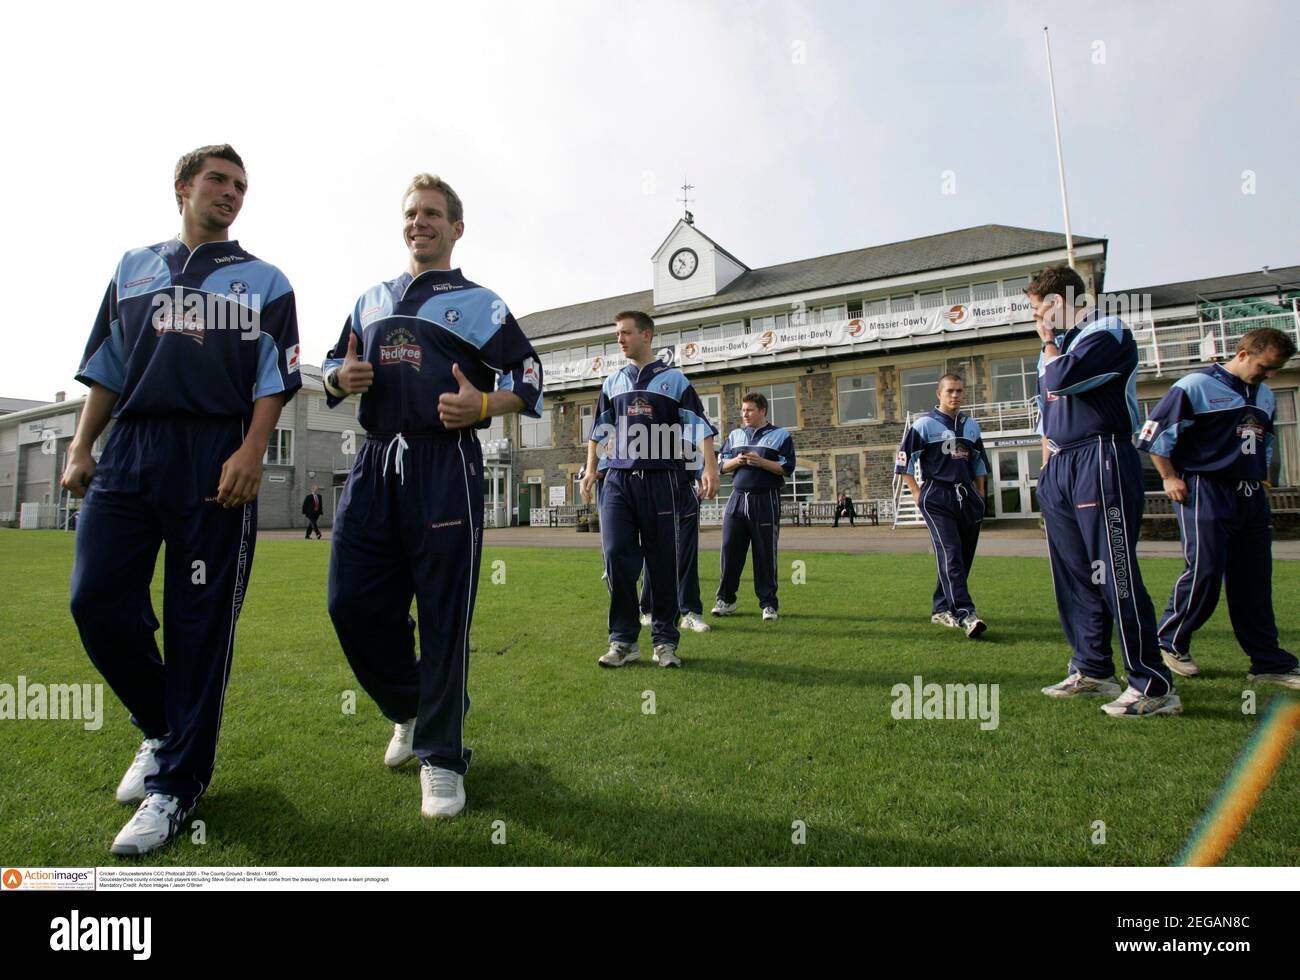 Cricket - Gloucestershire CCC Photocall 2005 - The County Ground - Bristol - 1/4/05  Gloucestershire county cricket club players including Steve Snell and Ian Fisher come from the dressing room to have a team photograph  Mandatory Credit: Action Images / Jason O'Brien Stock Photo